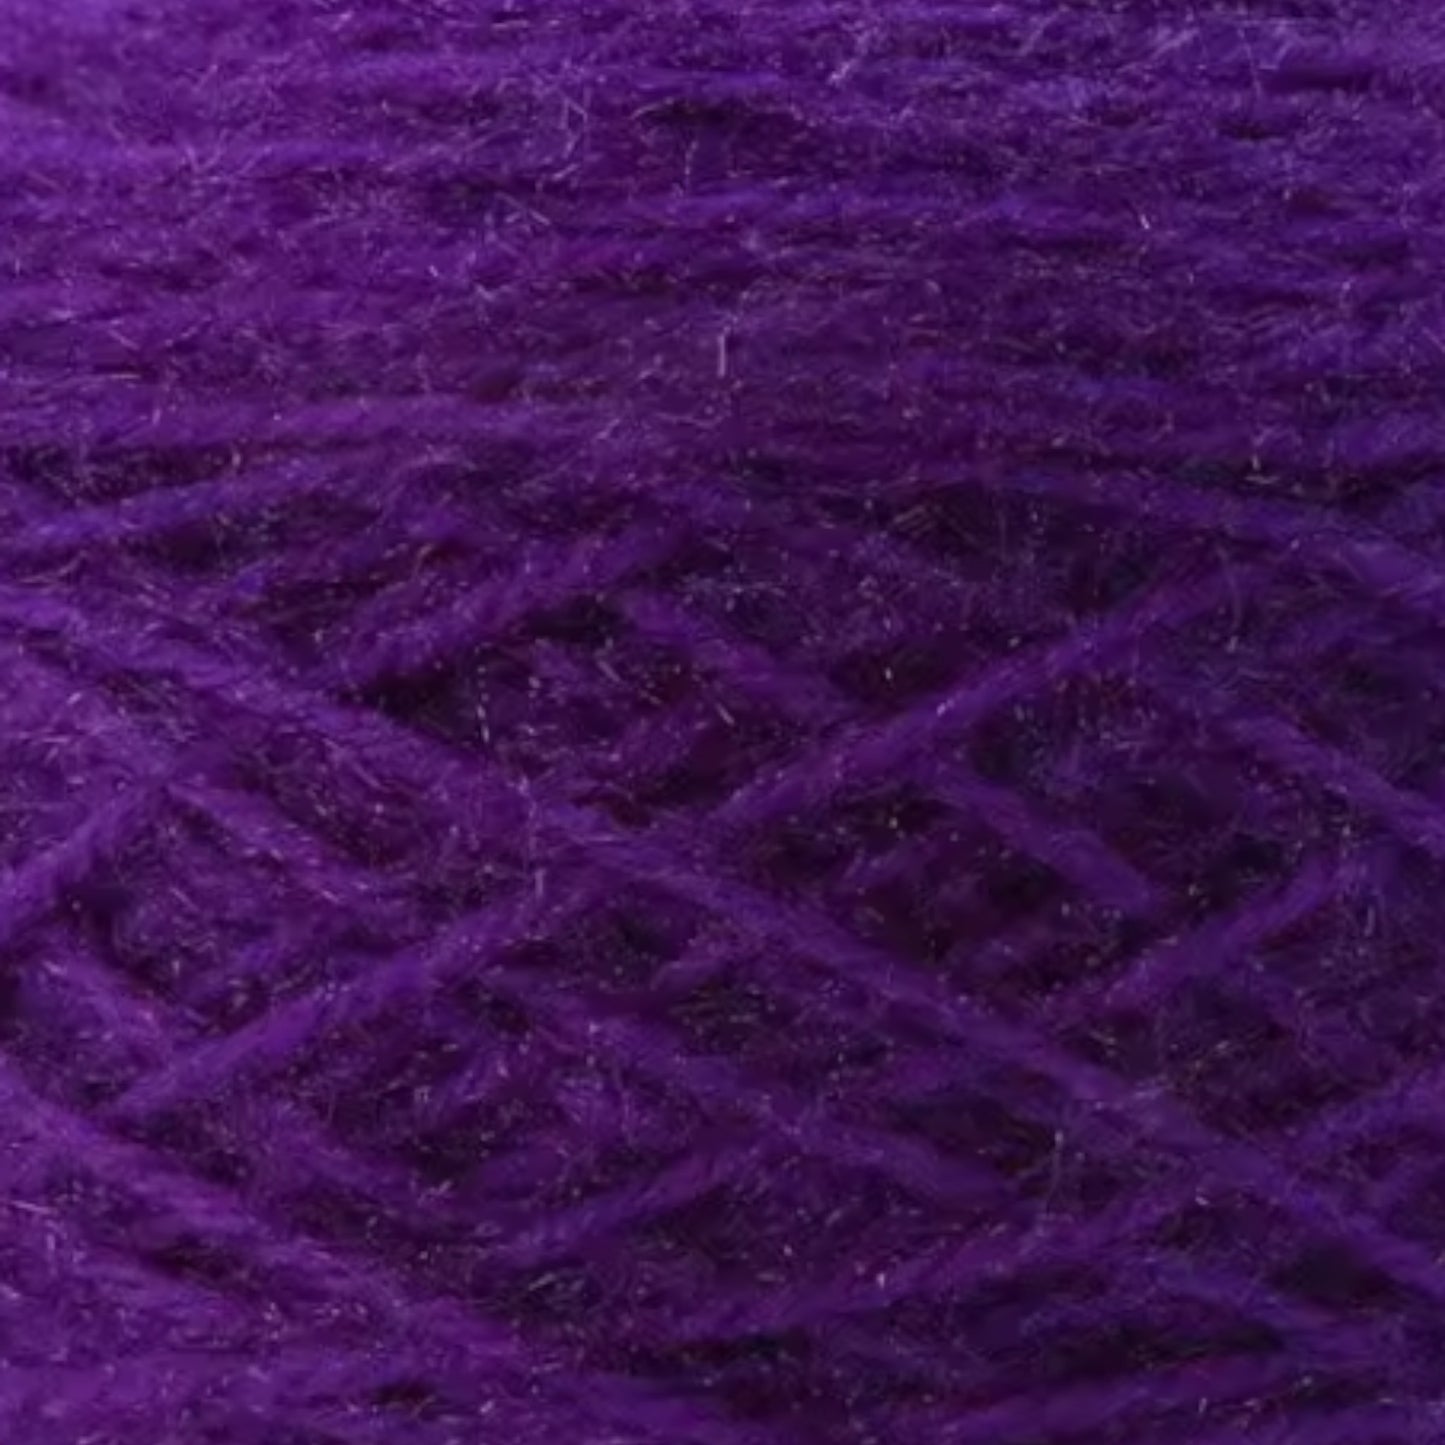 Stitch & Spool Solid Fuzz Fine Polyester Yarn - 100% Polyester, 150g/410yd Skeins in 7 Solid Colors